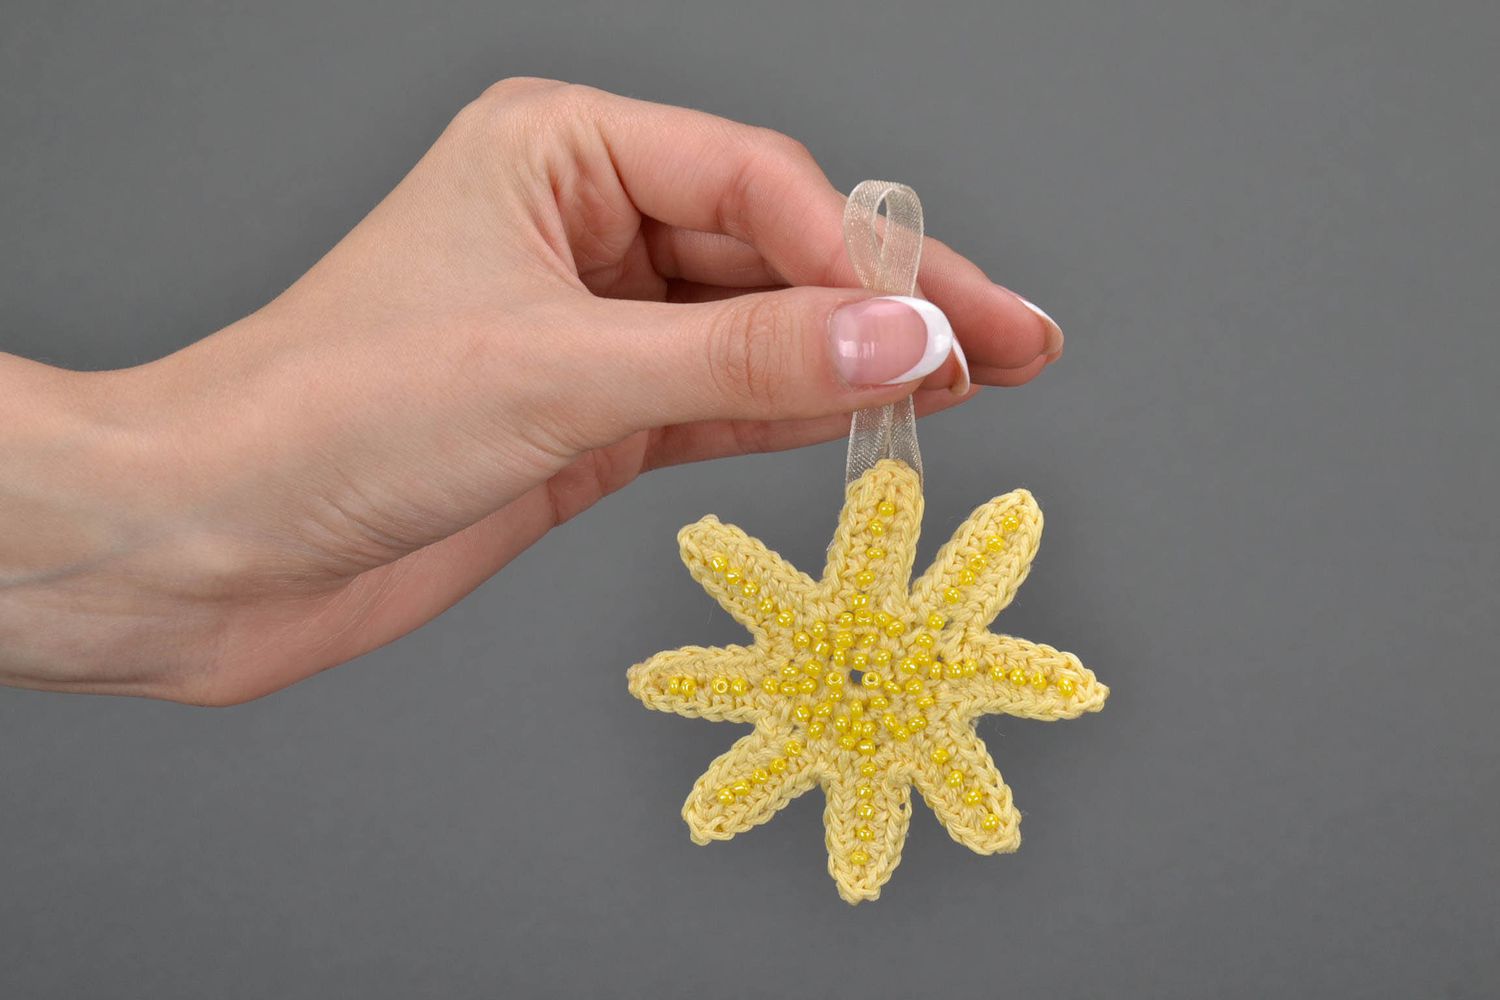 Christmas tree decoration crocheted by hand photo 5